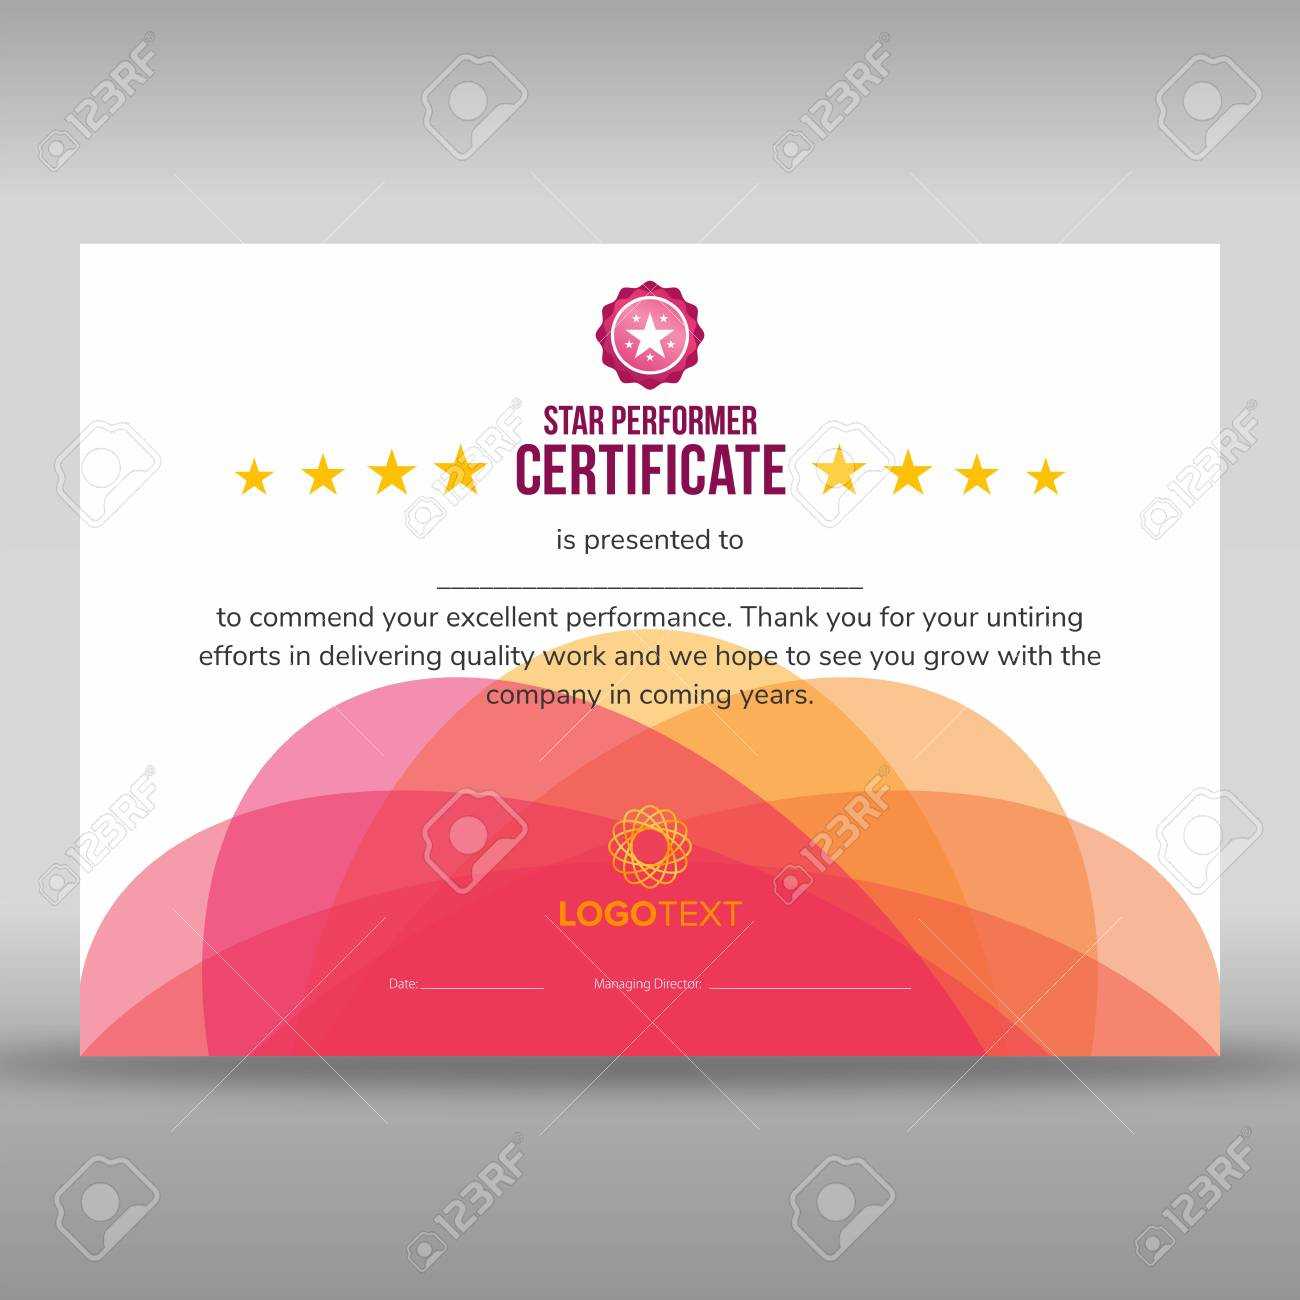 Abstract Creative Pink Star Performer Certificate For Star Performer Certificate Templates